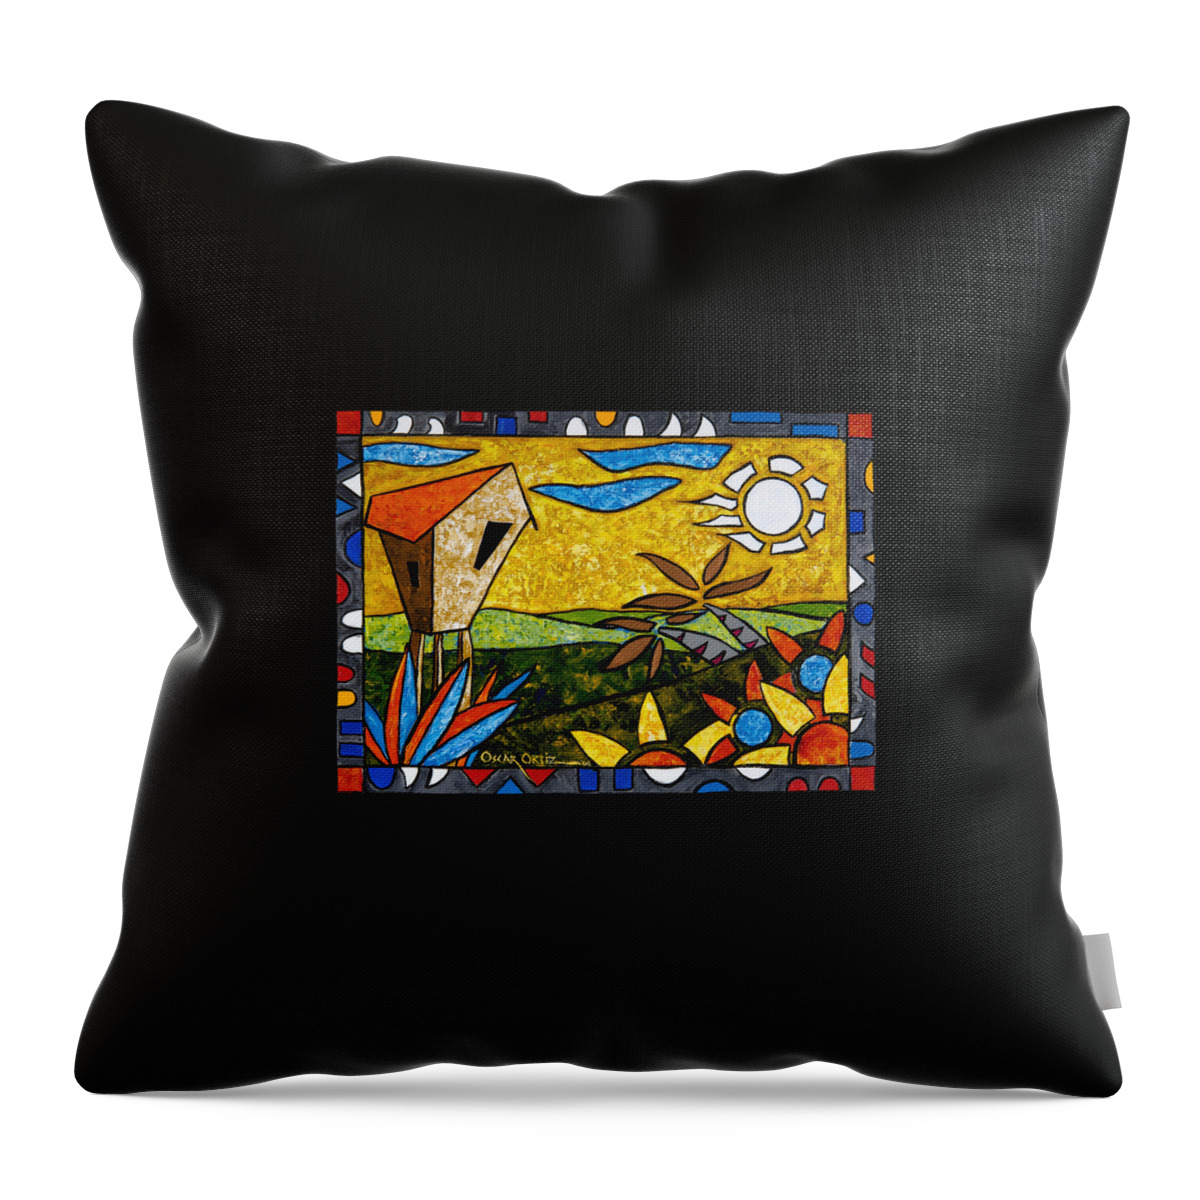 Puerto Rico Throw Pillow featuring the painting Country Peace by Oscar Ortiz